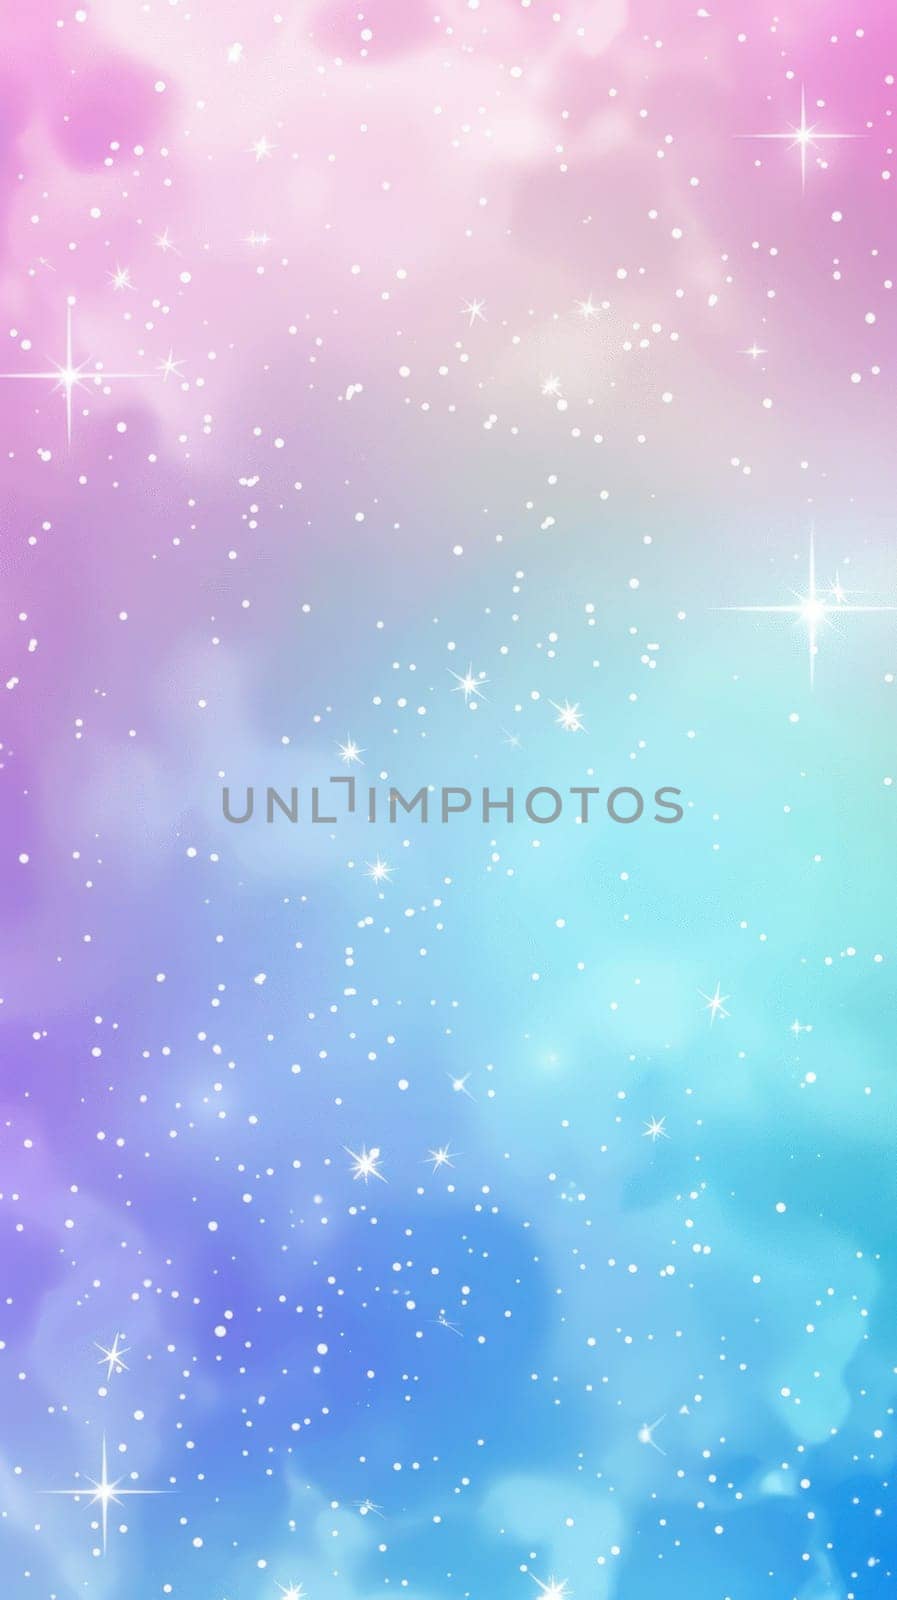 A colorful background with stars and a blue and pink swirl. The stars are scattered throughout the background, creating a sense of depth and movement